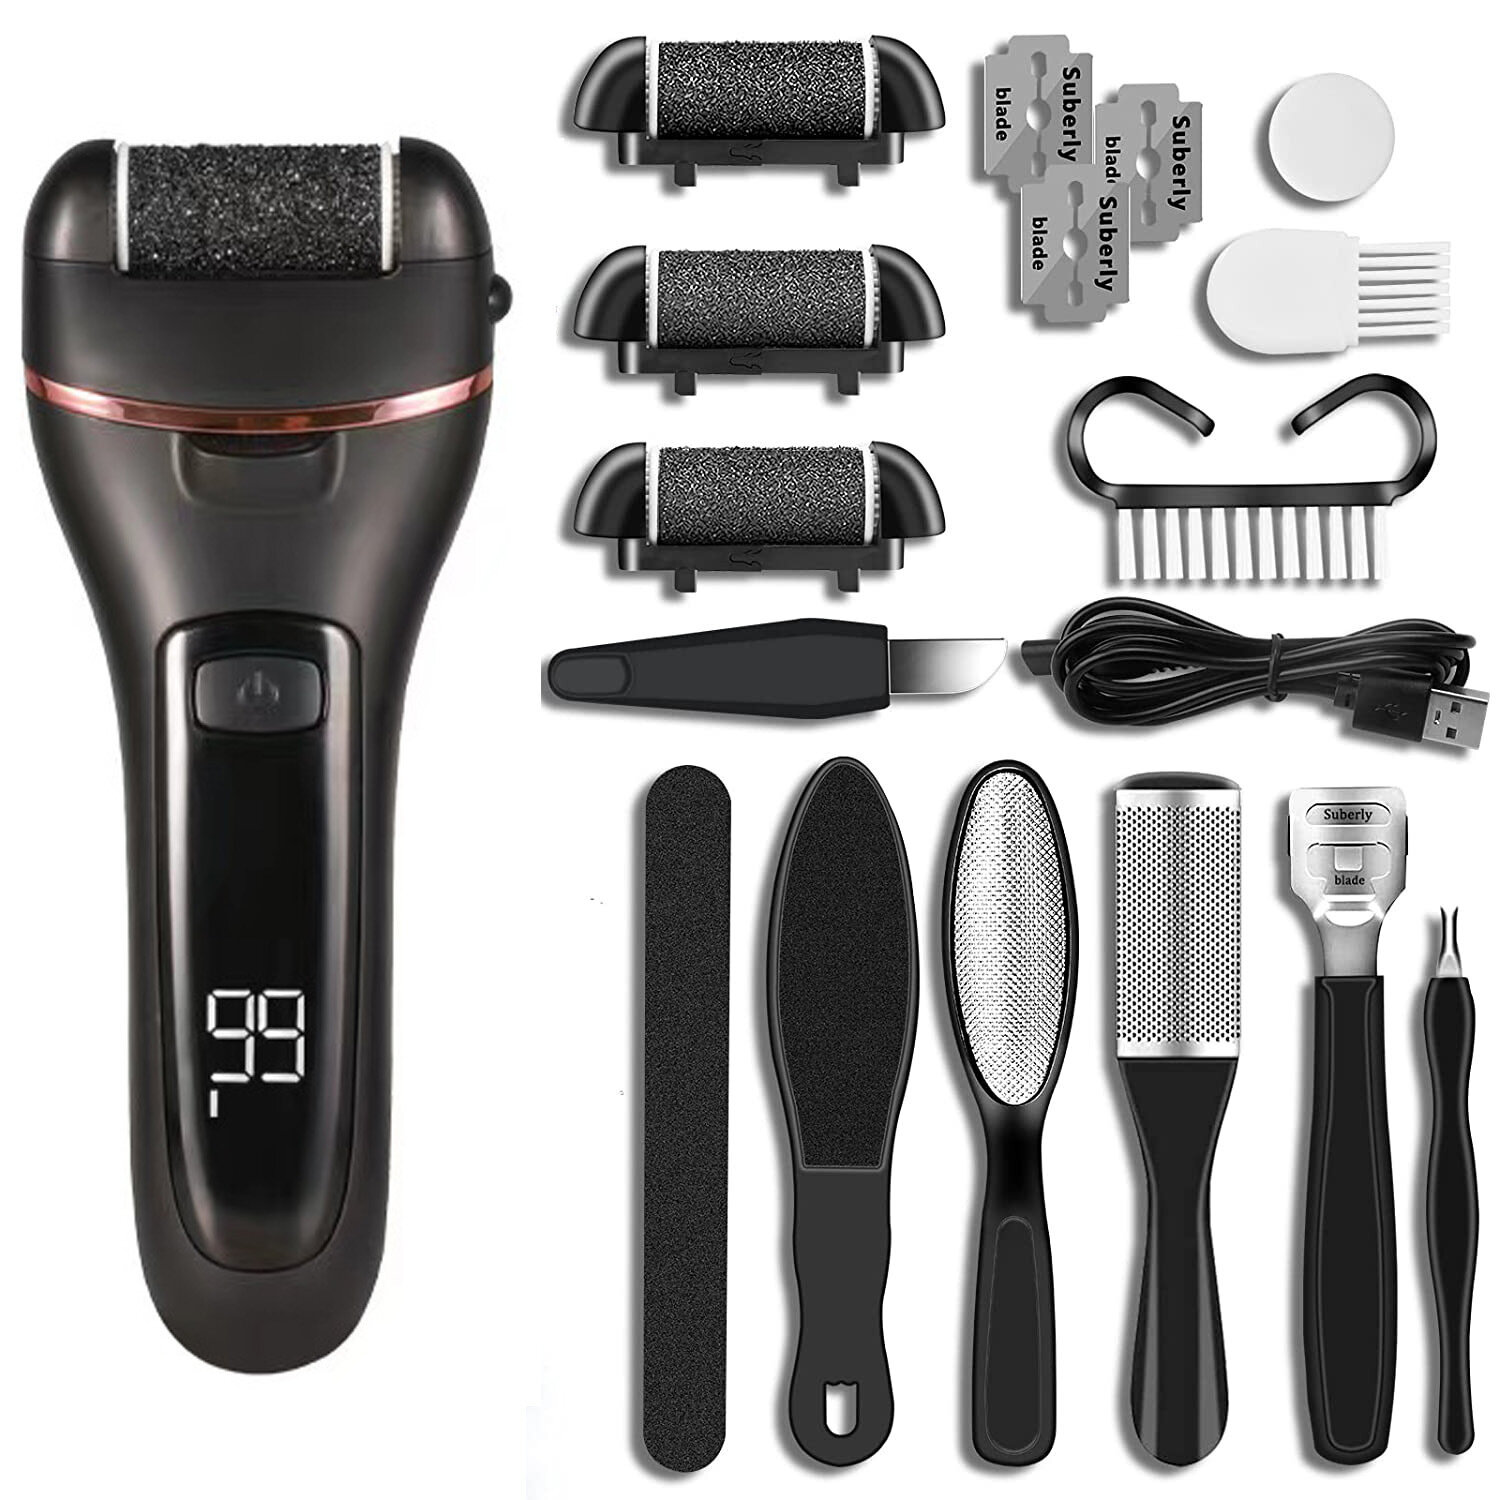 

Foot Callus Remover Electric Callus Remover Foot Grinder Black 10 in1 Pedicure Kit for Feet